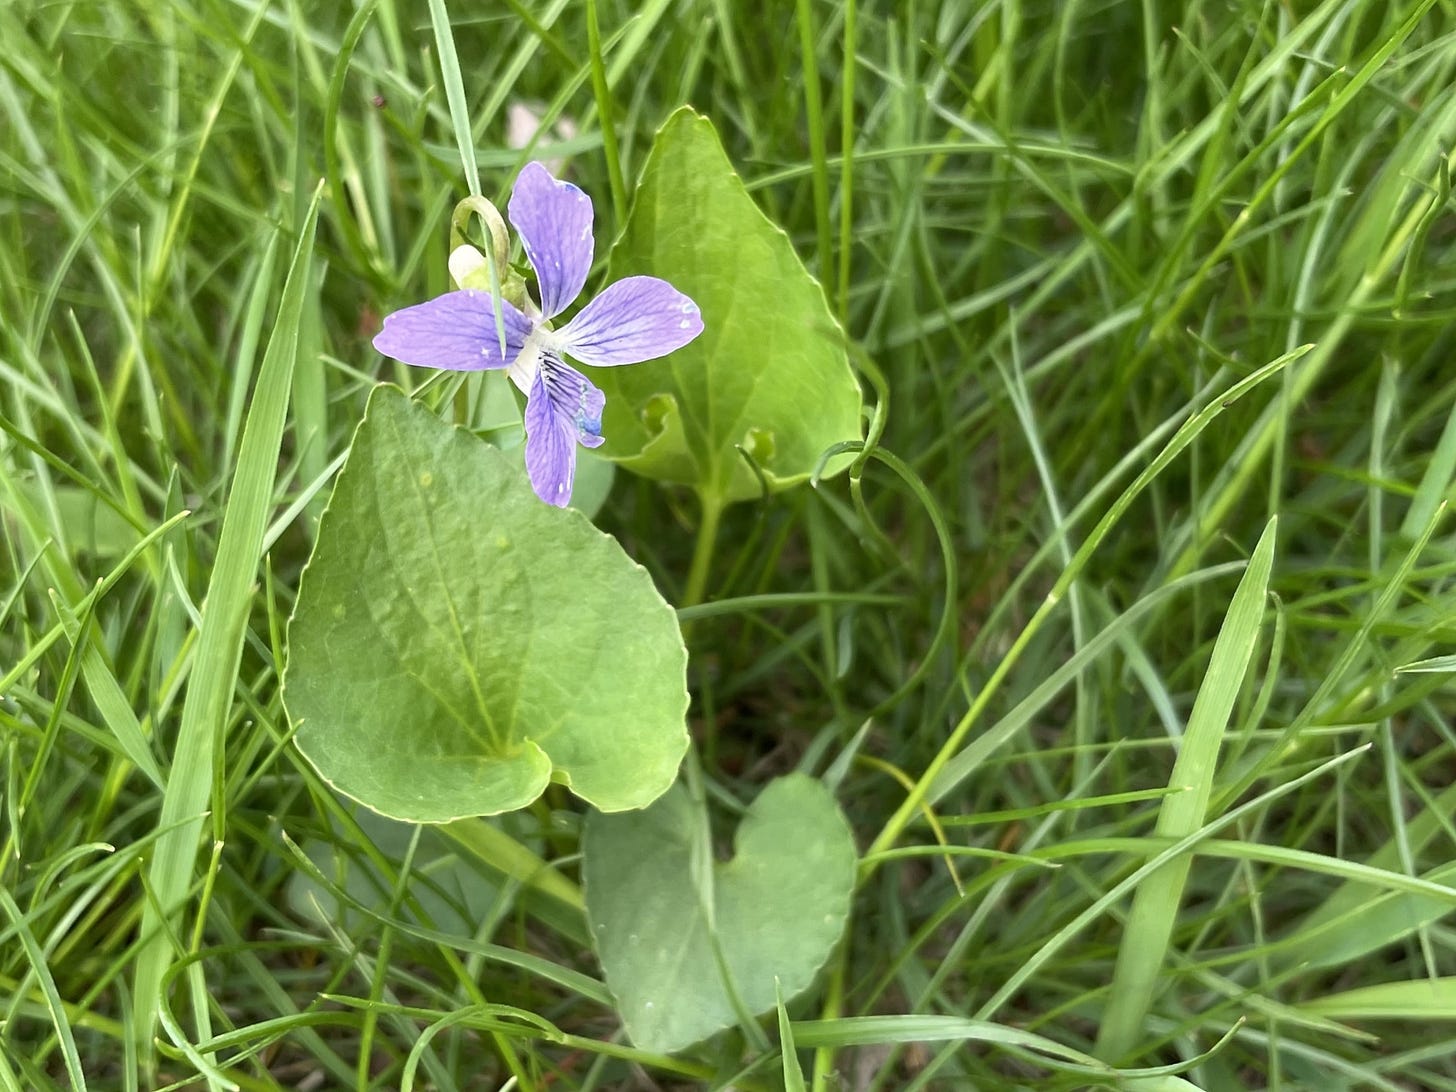 A wild purple violet in a green lawn